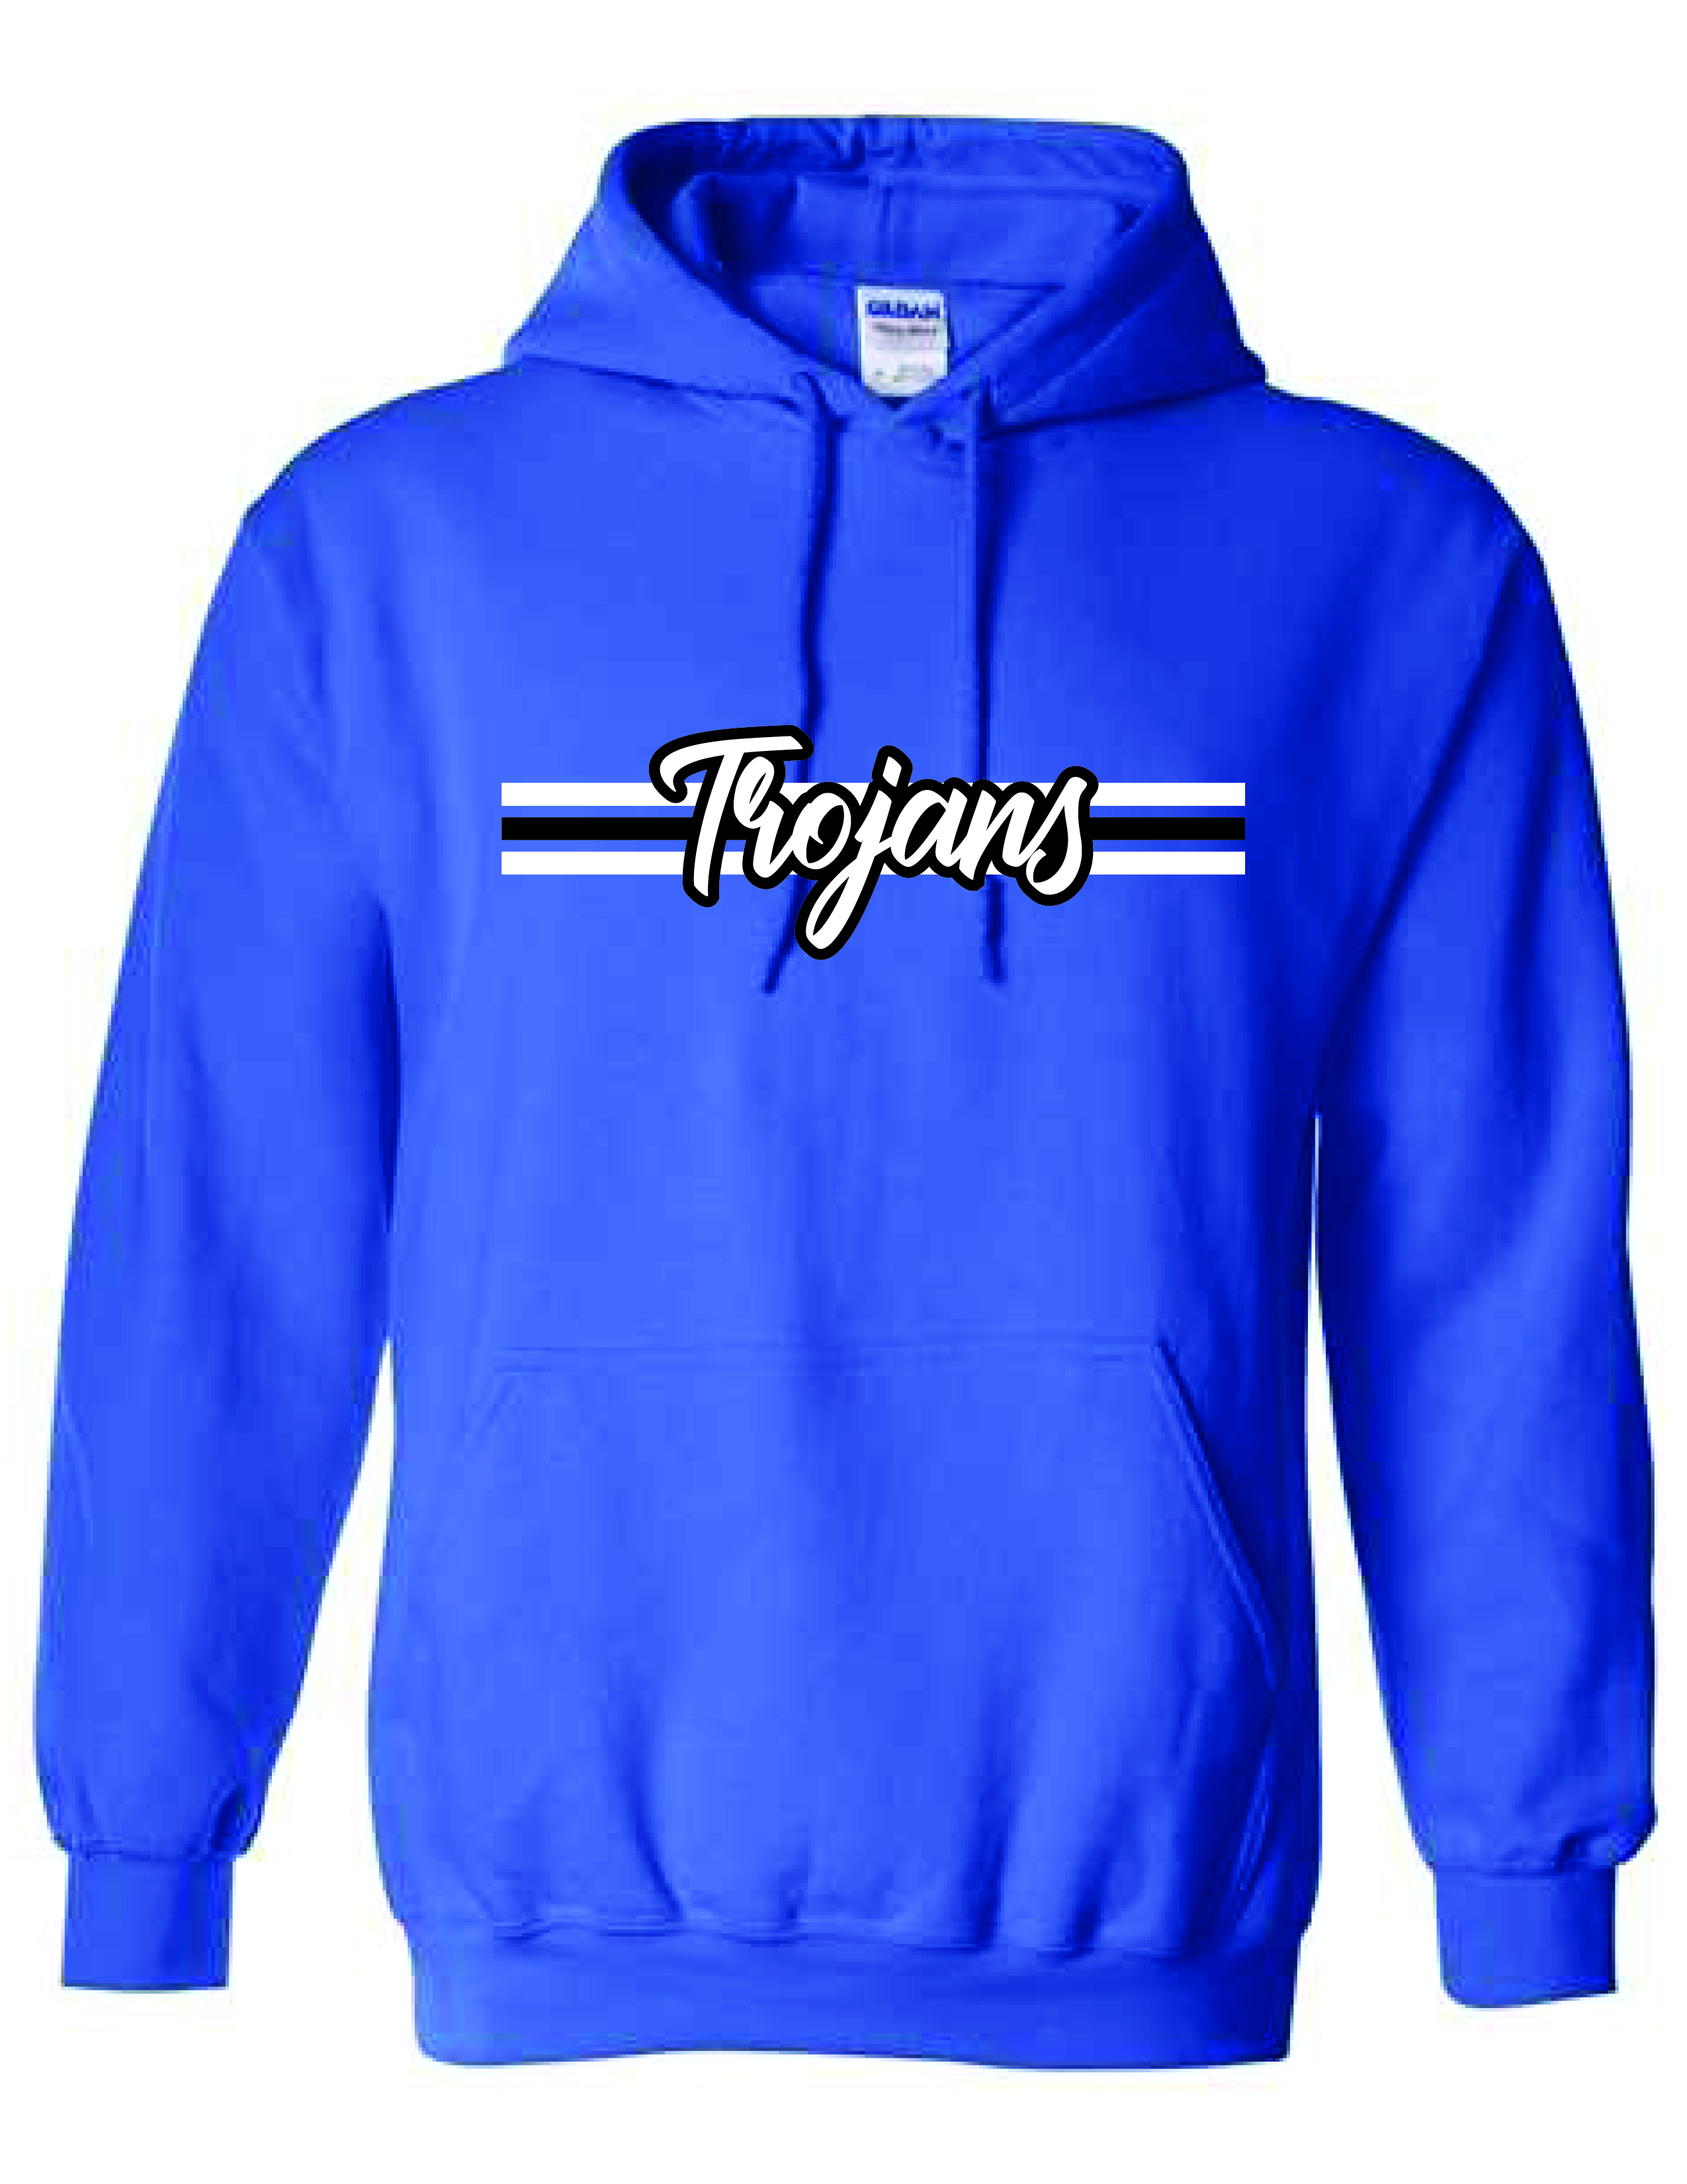 TROJAN HOODIE (Mens' and Youth sizes)